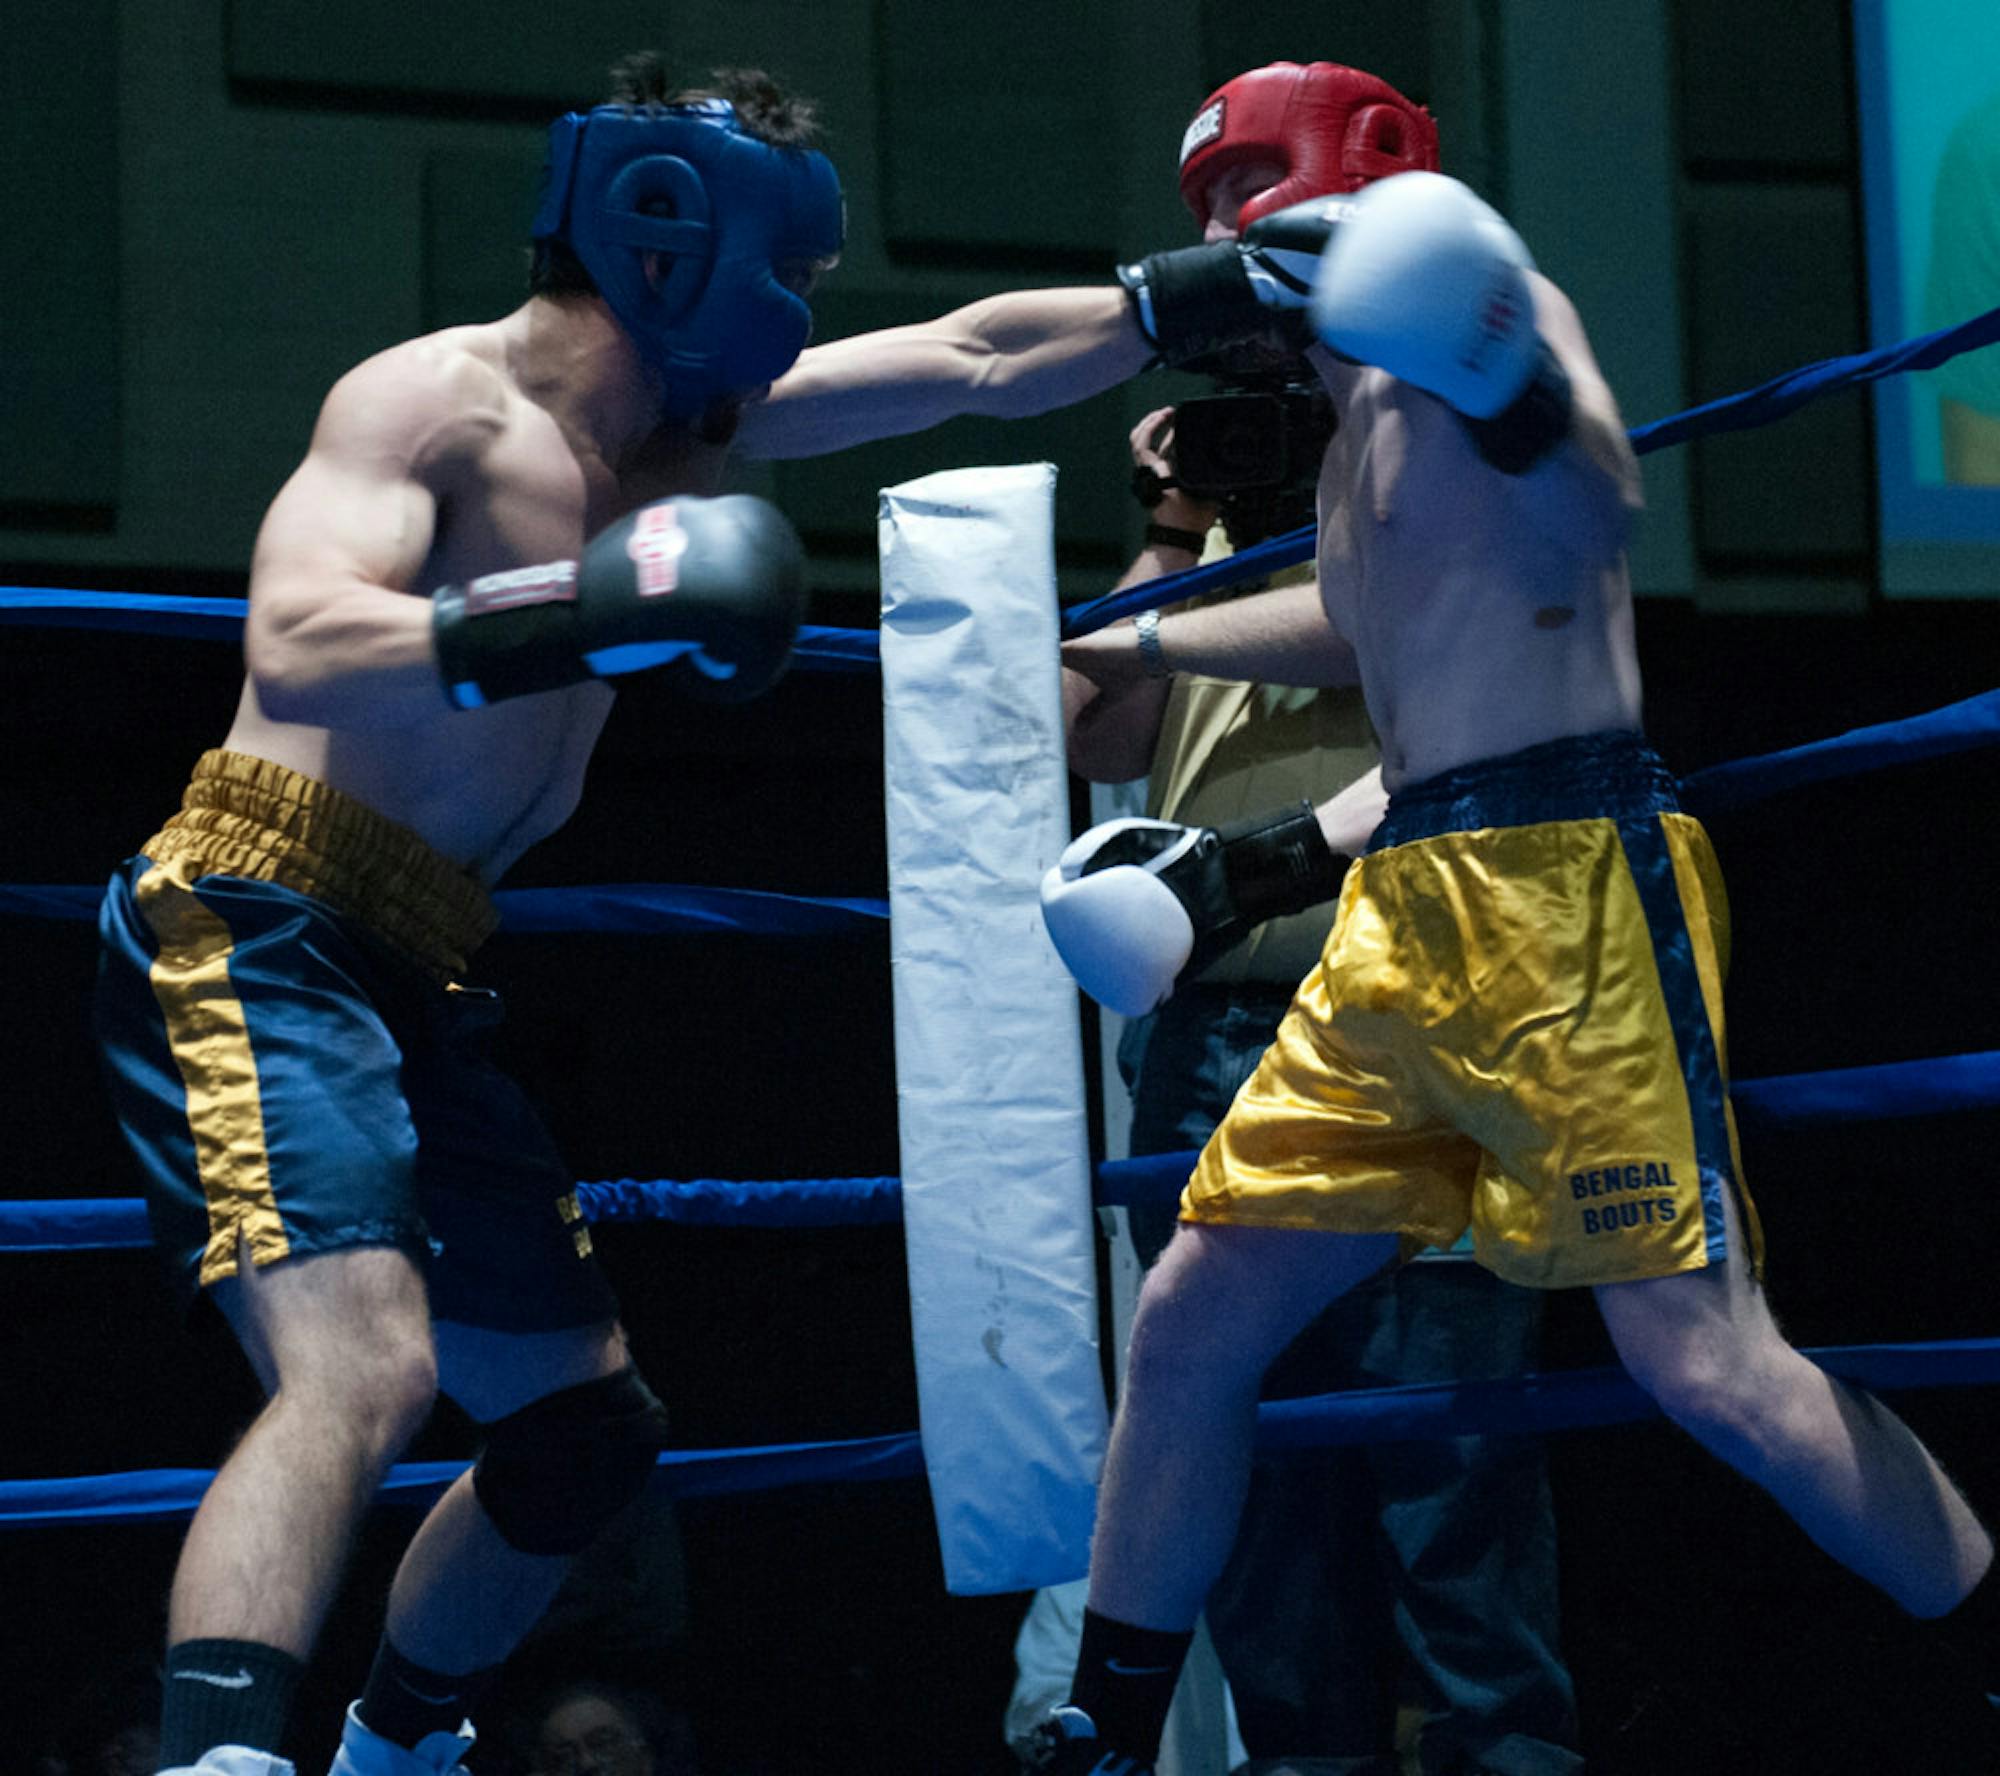 Senior Evan Escobedo, left, throws a punch during Tuesday’s semifinal bouts at Joyce Fieldhouse. Escobedo, the president of Bengal Bouts, lost by unanimous decision to Keough Hall freshman Pat Gordon in the 196-pound weight class. The Fisher Hall resident previously served as a Bengal Bouts captain before becoming president this year.